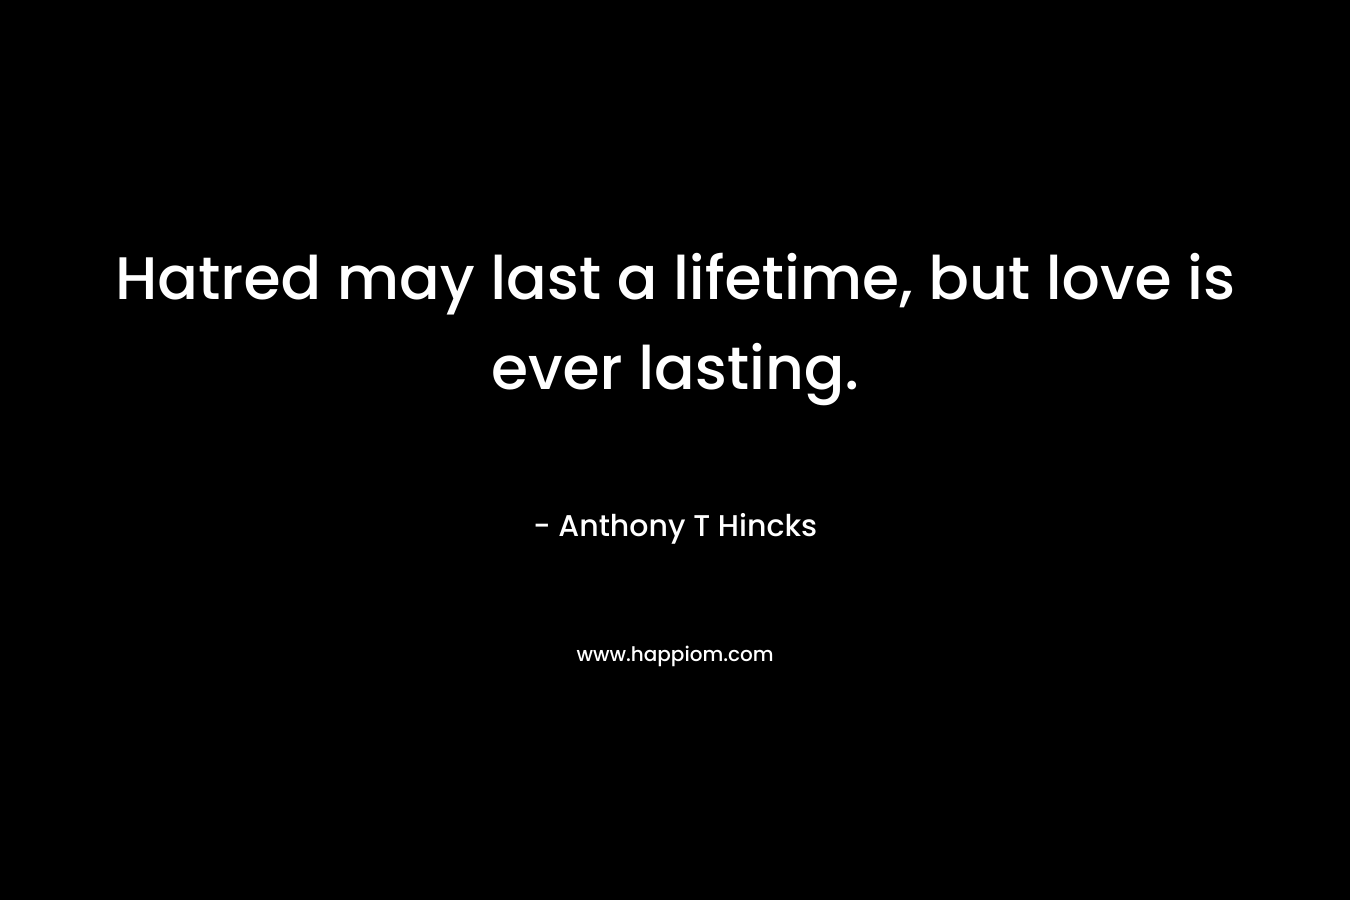 Hatred may last a lifetime, but love is ever lasting. – Anthony T Hincks